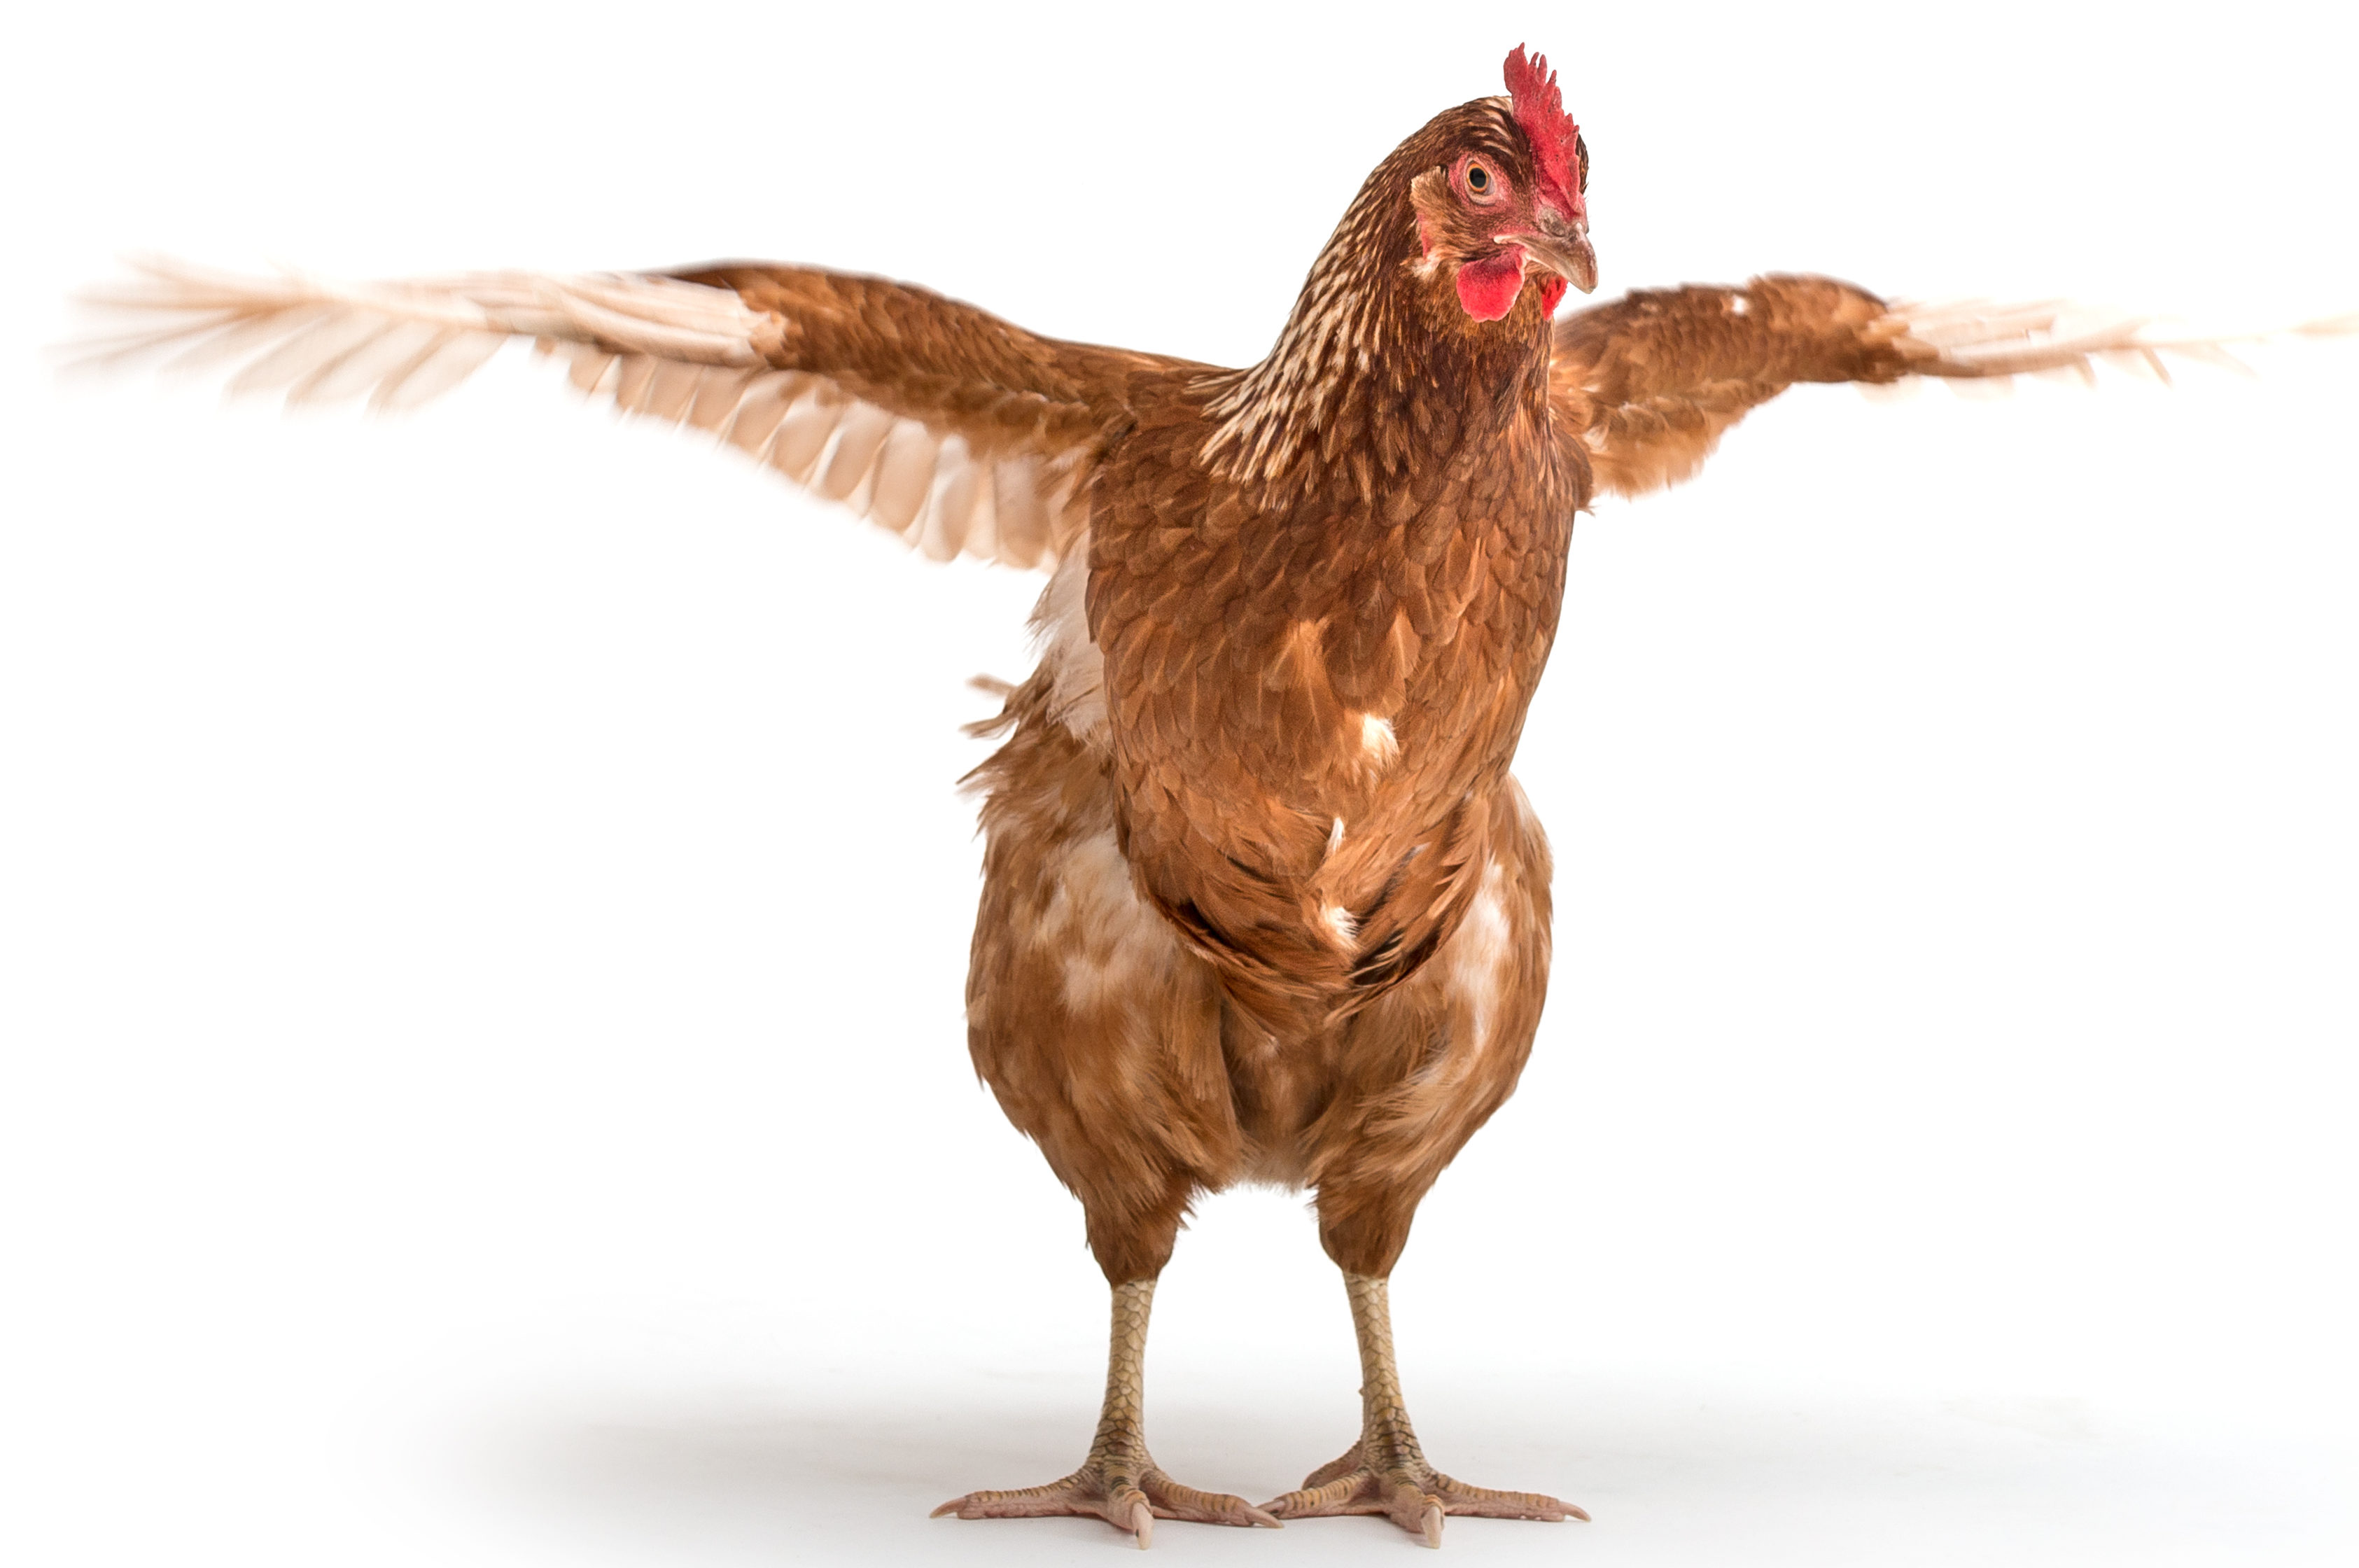 Does a Chicken Anatomy Differ From Other Animals? | Small Pet Select